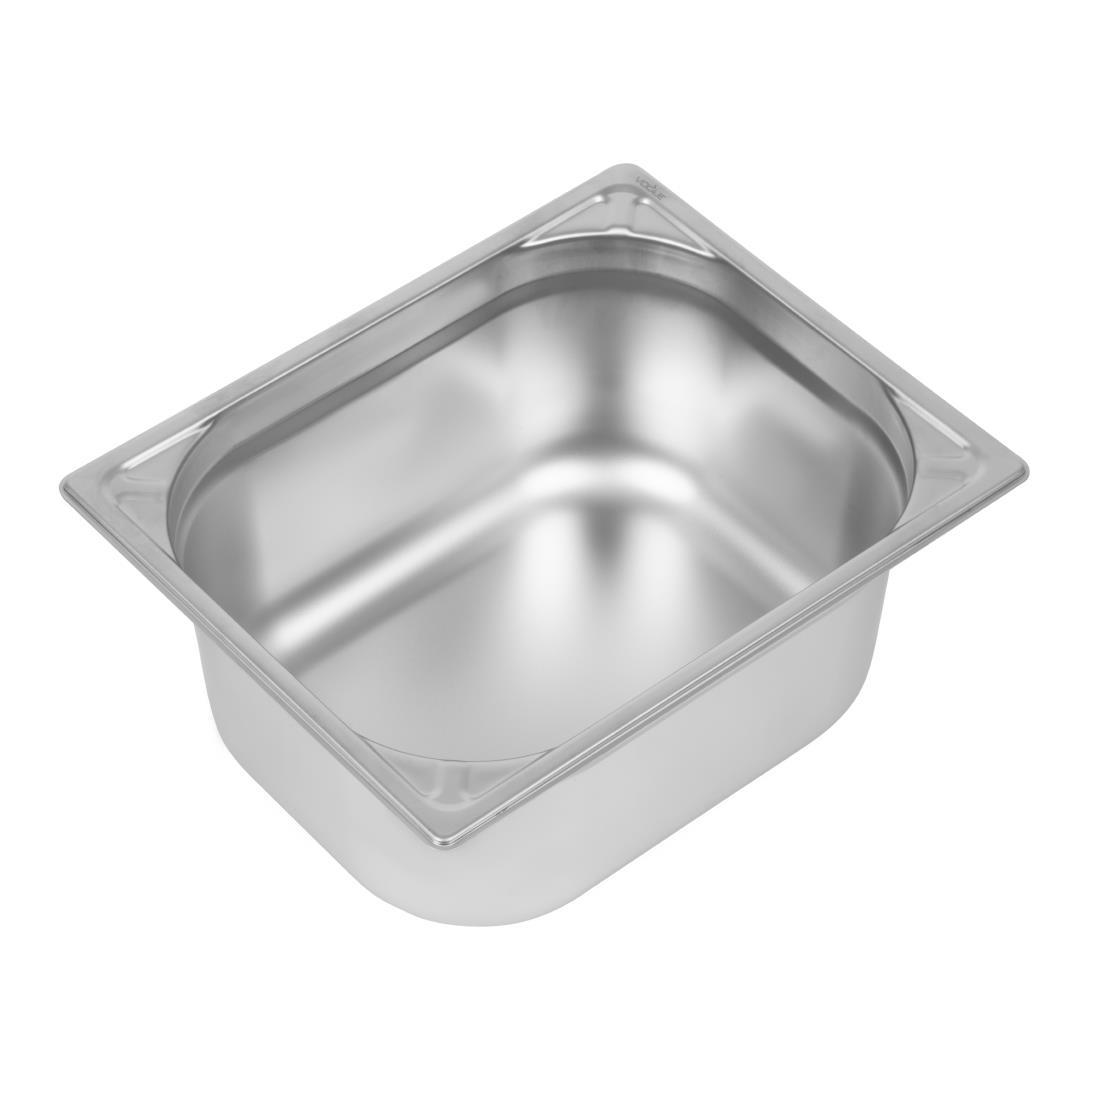 Vogue Heavy Duty Stainless Steel 1/2 Gastronorm Pan 150mm - DW440  - 1